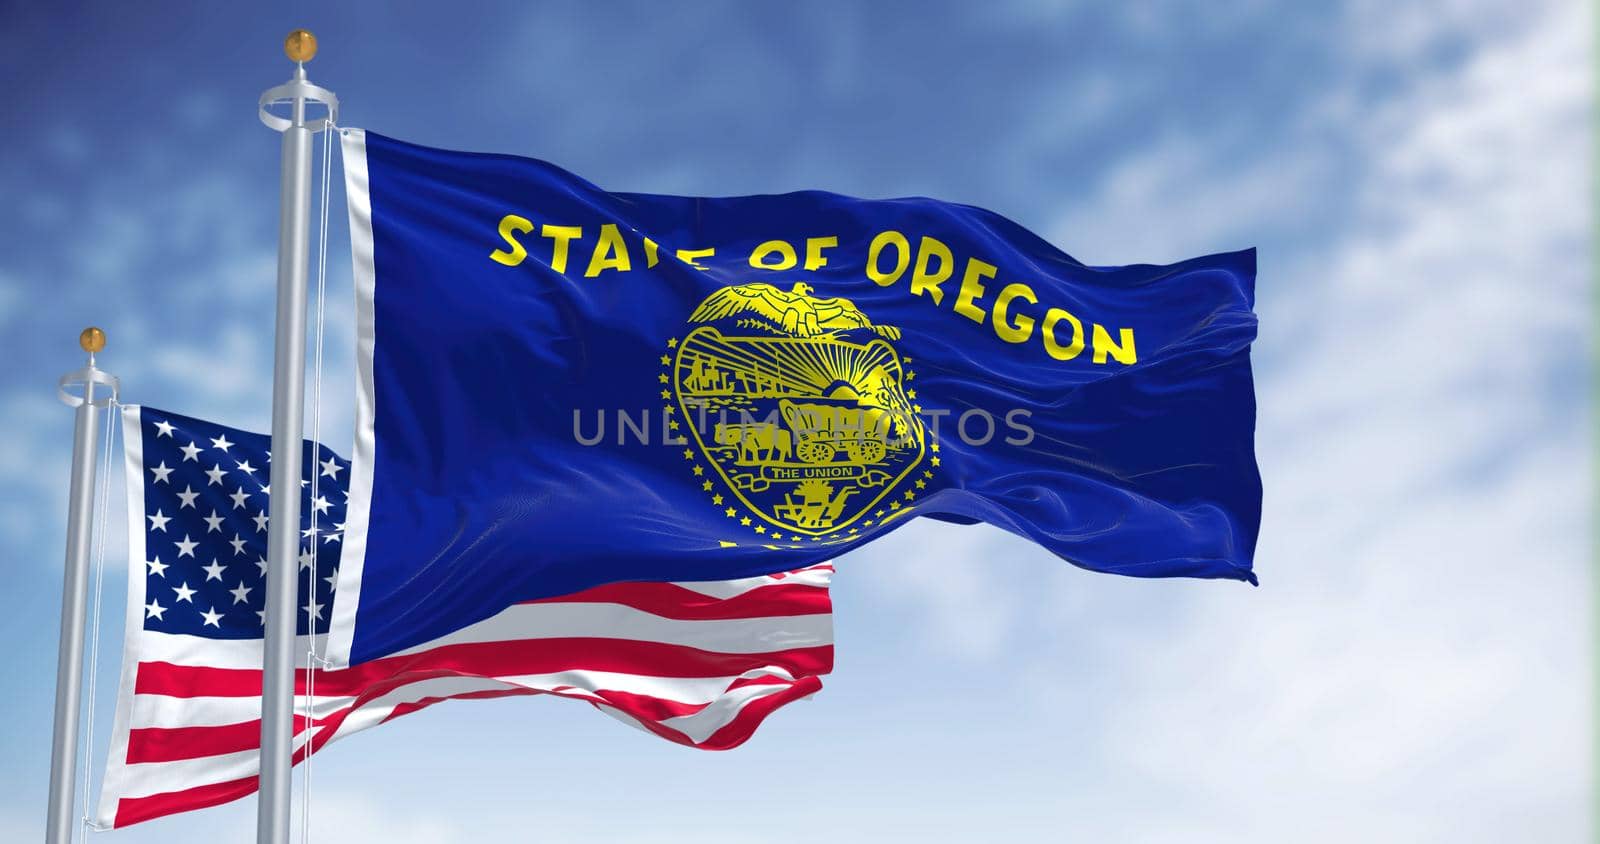 The Oregon state flag waving along with the national flag of the United States of America by rarrarorro